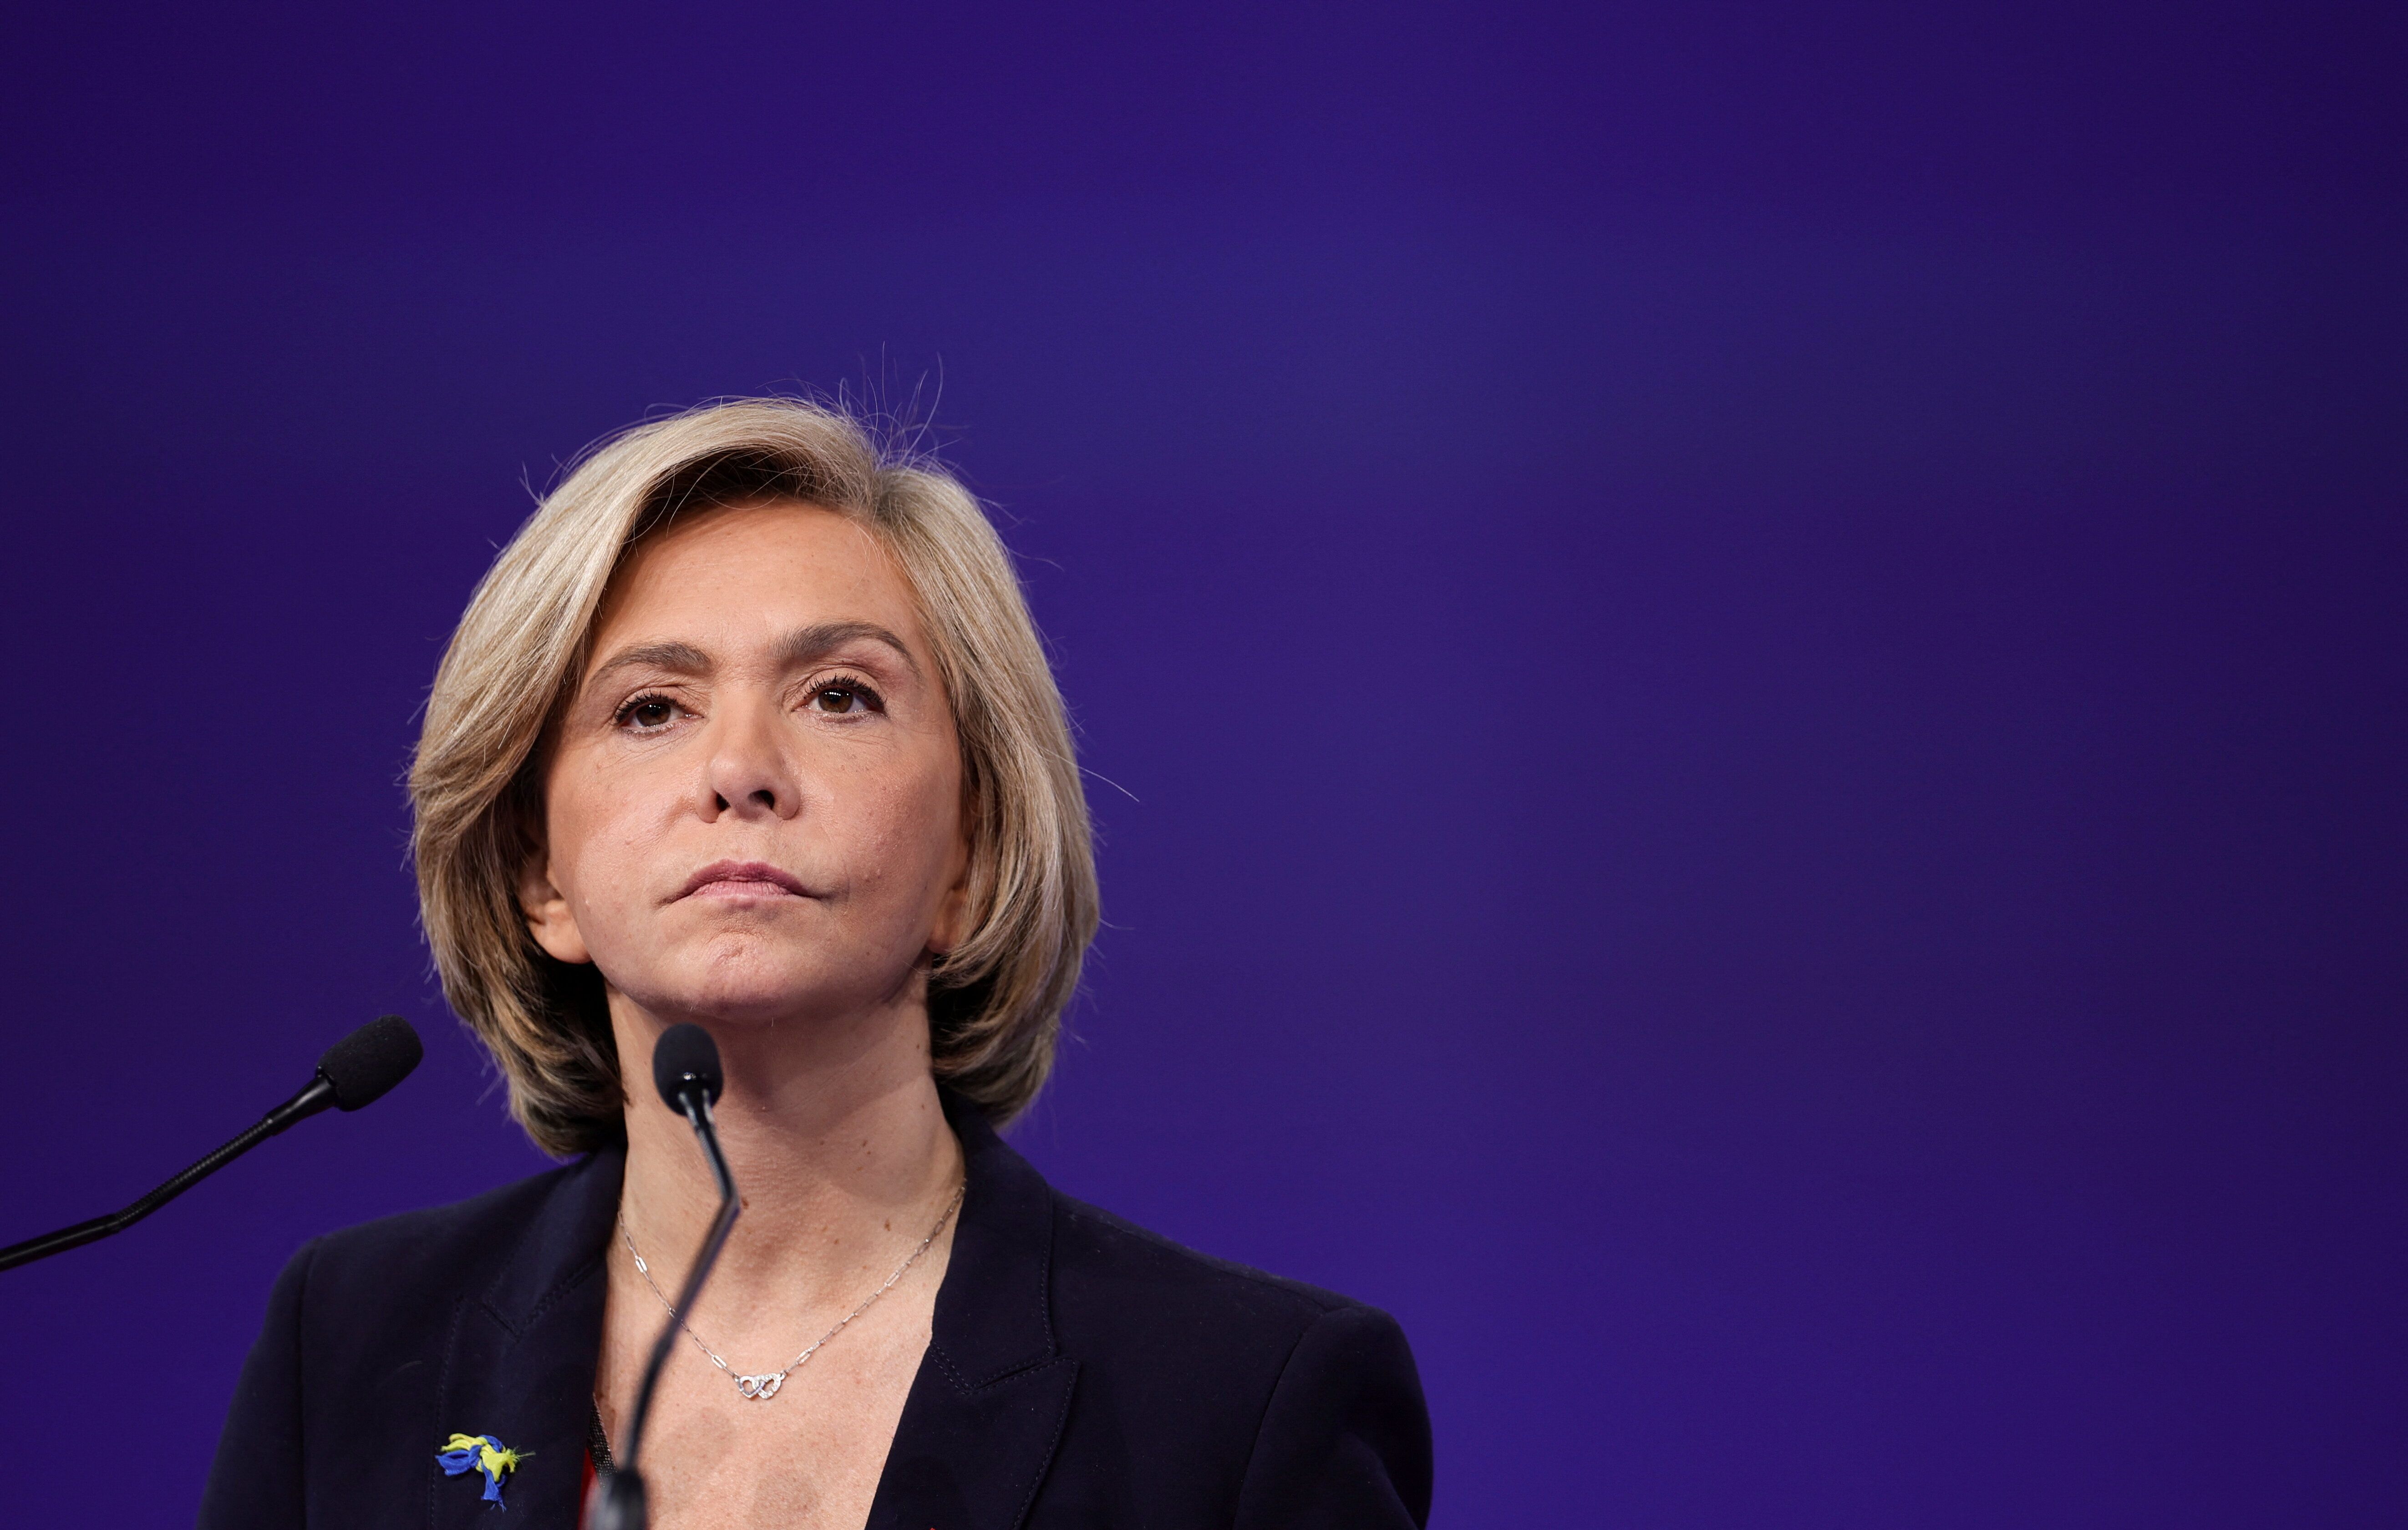 Valerie Pecresse, head of the Paris Ile-de-France region and LR candidate in the 2022 French presidential...